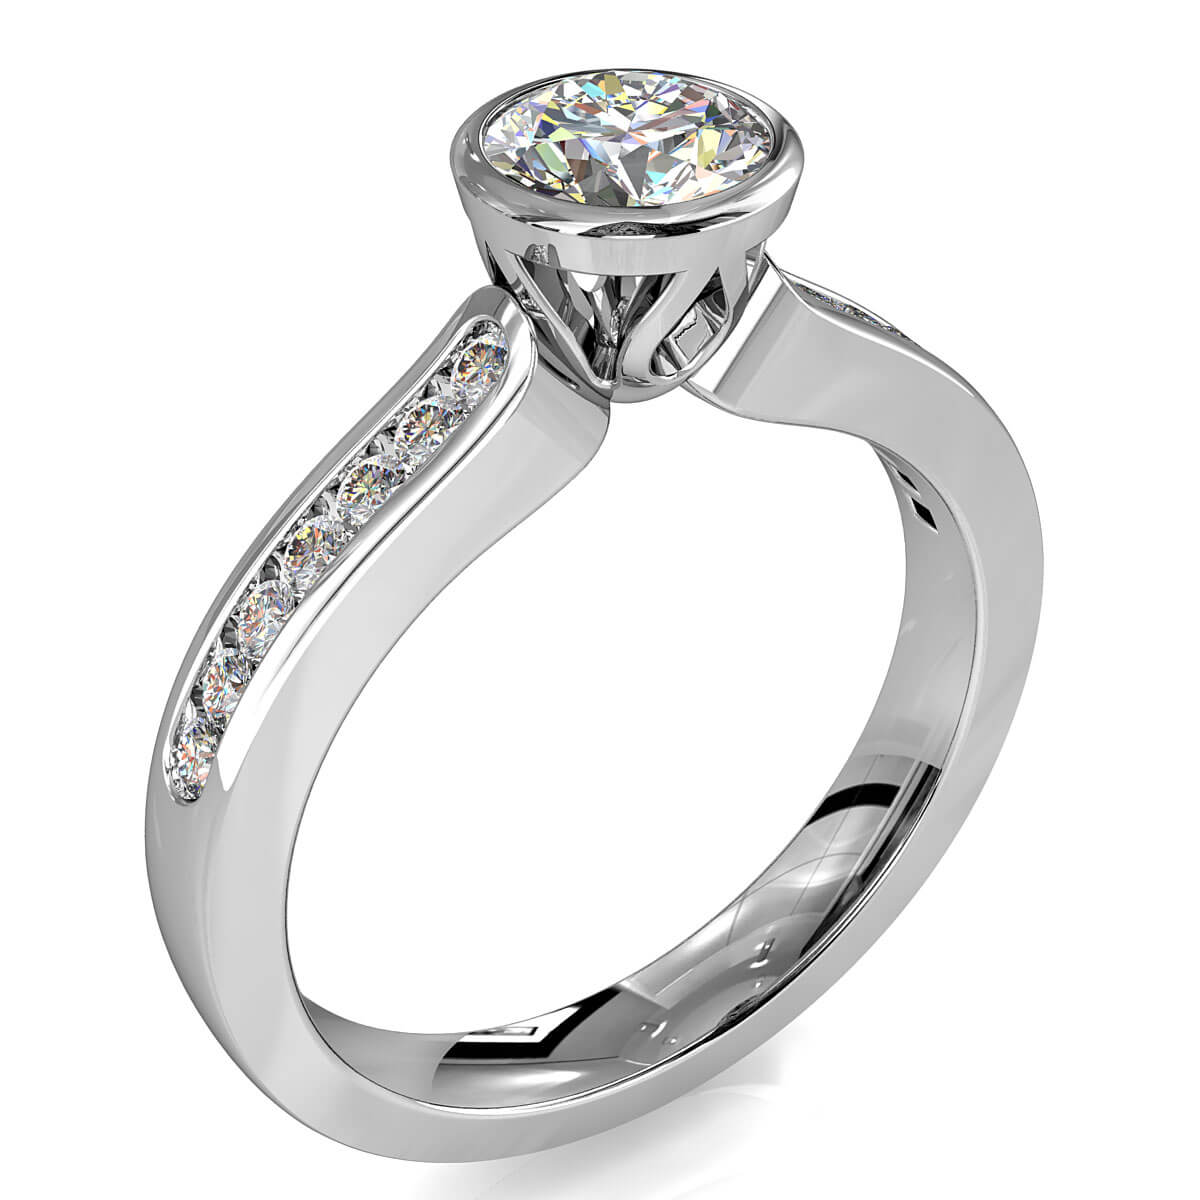 Round Brilliant Cut Diamond Solitaire Engagement Ring, Bezel Set on a Channel Set Band with Lotus Undersetting.